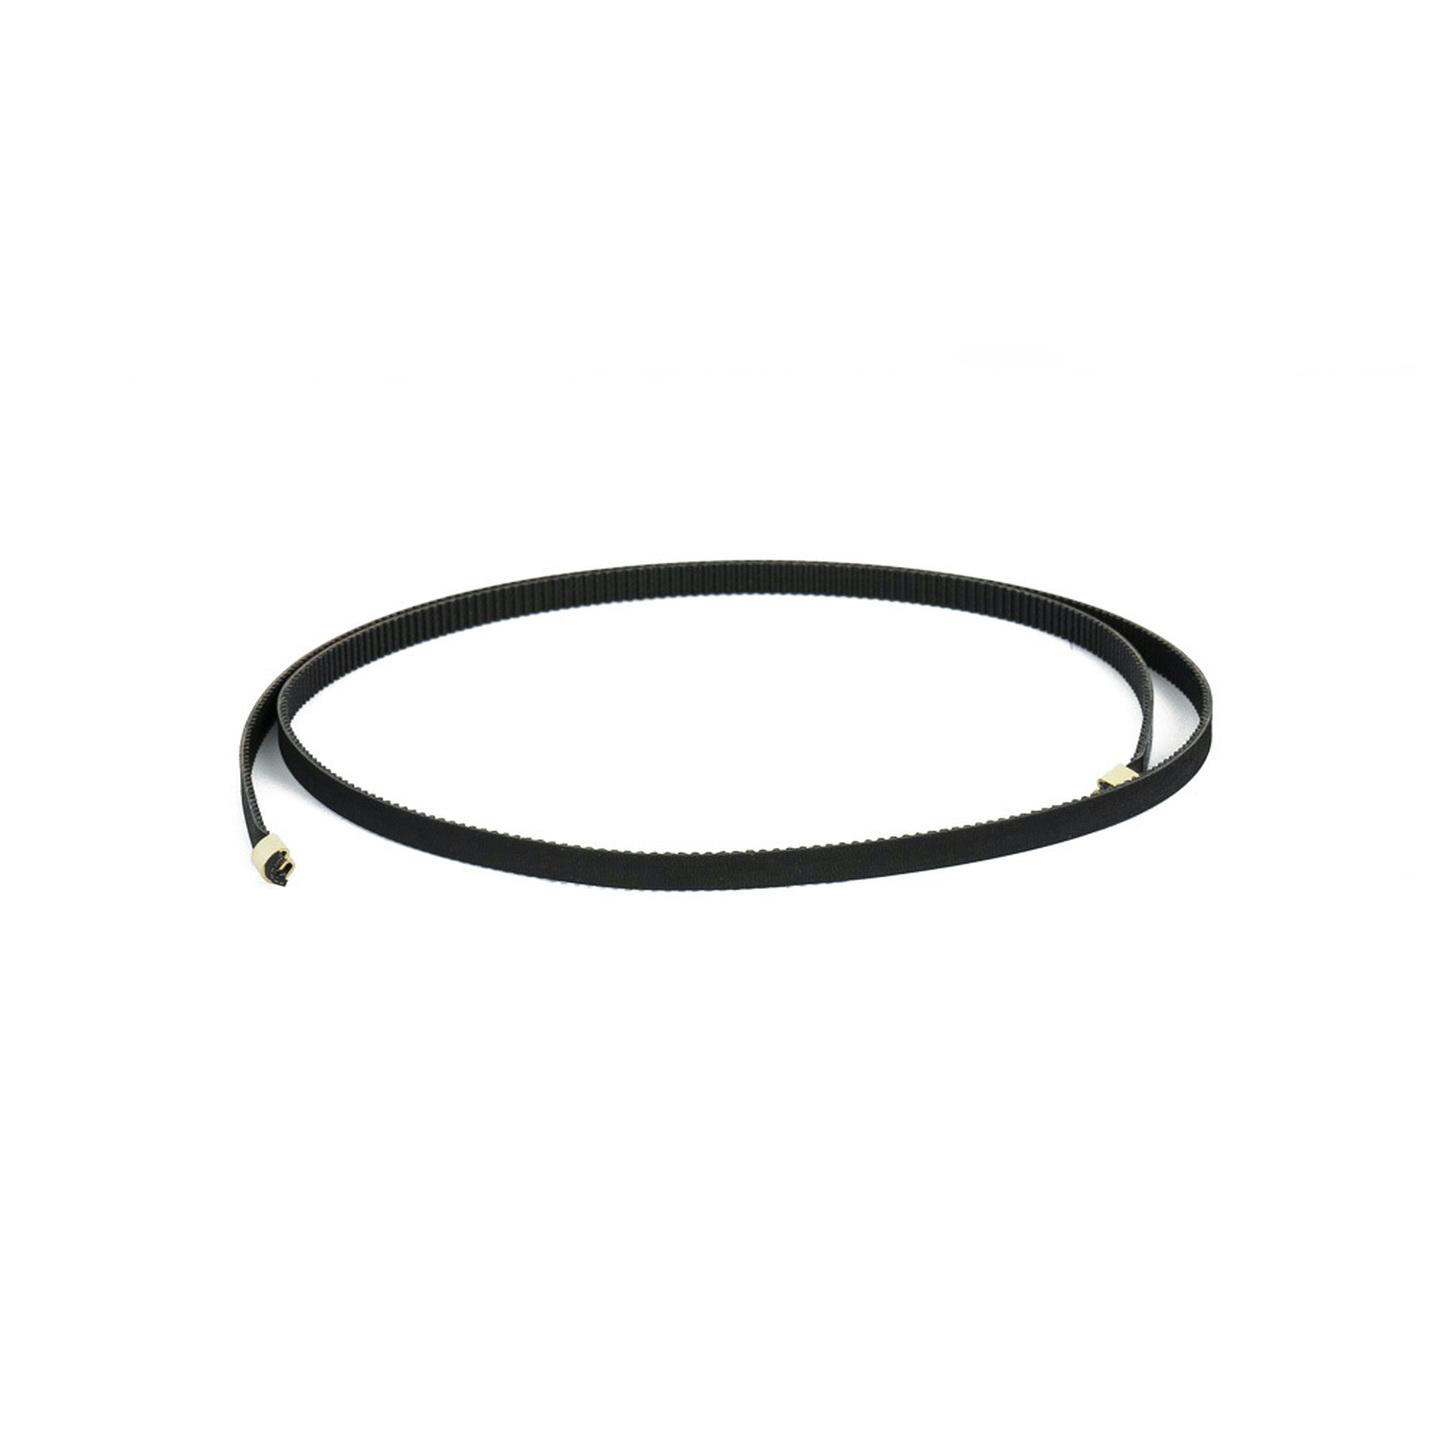 Spare Timing Belt for Filament Printers